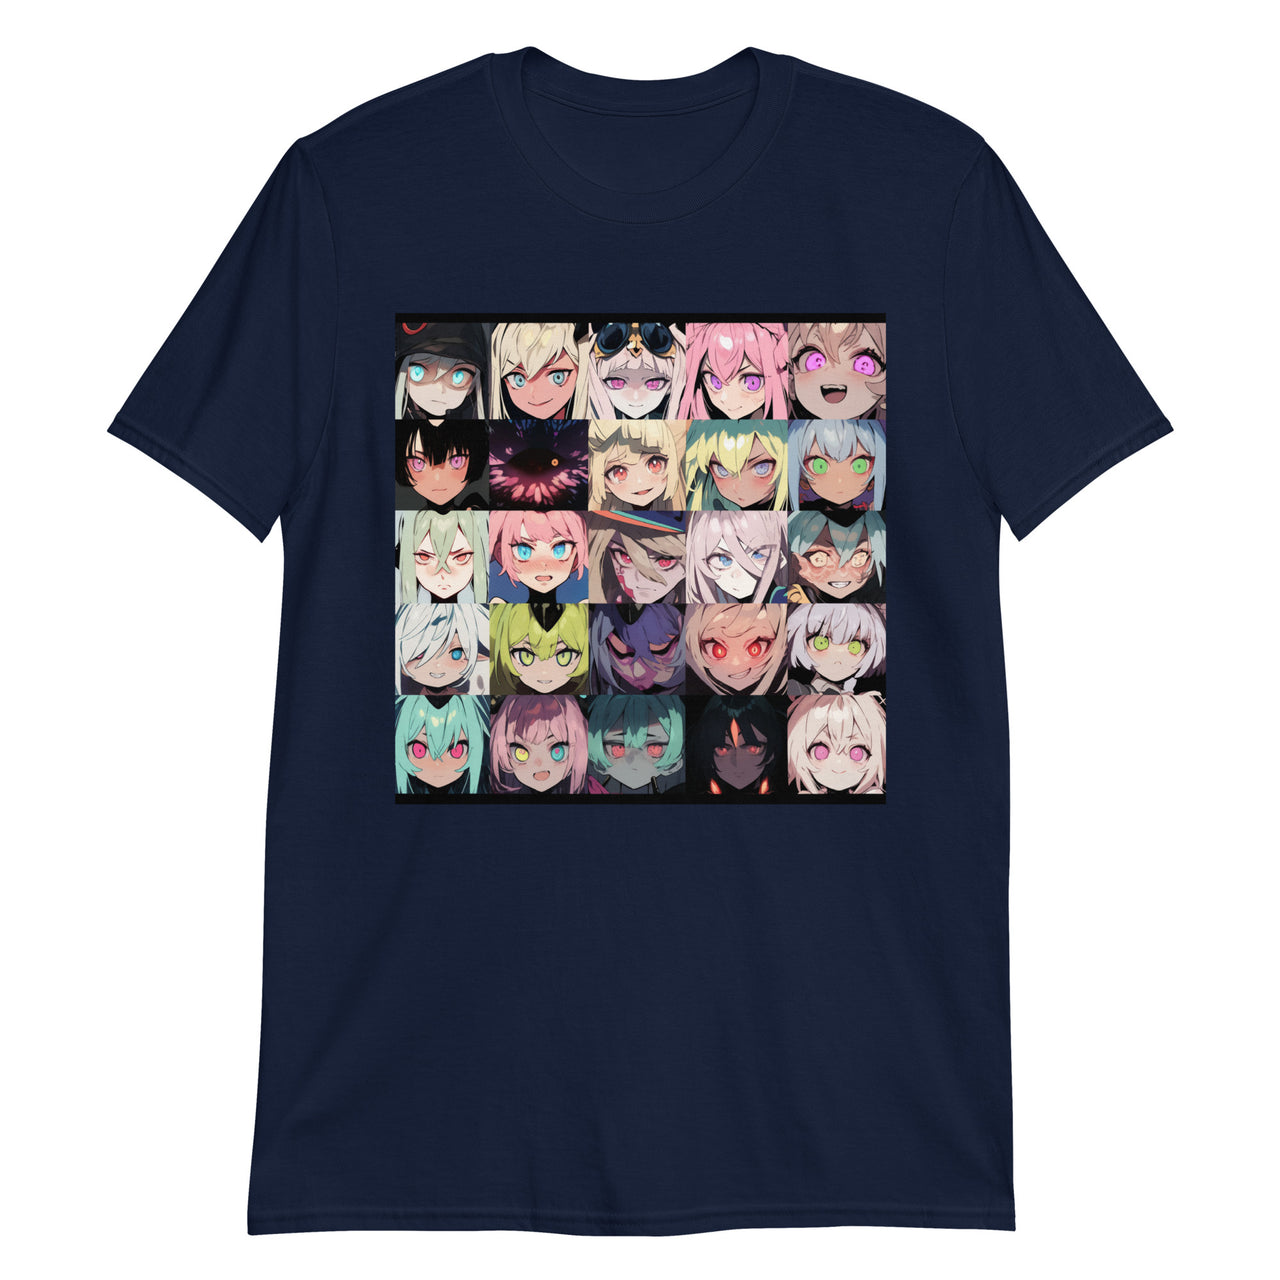 25 Expressive Anime Faces T-Shirt